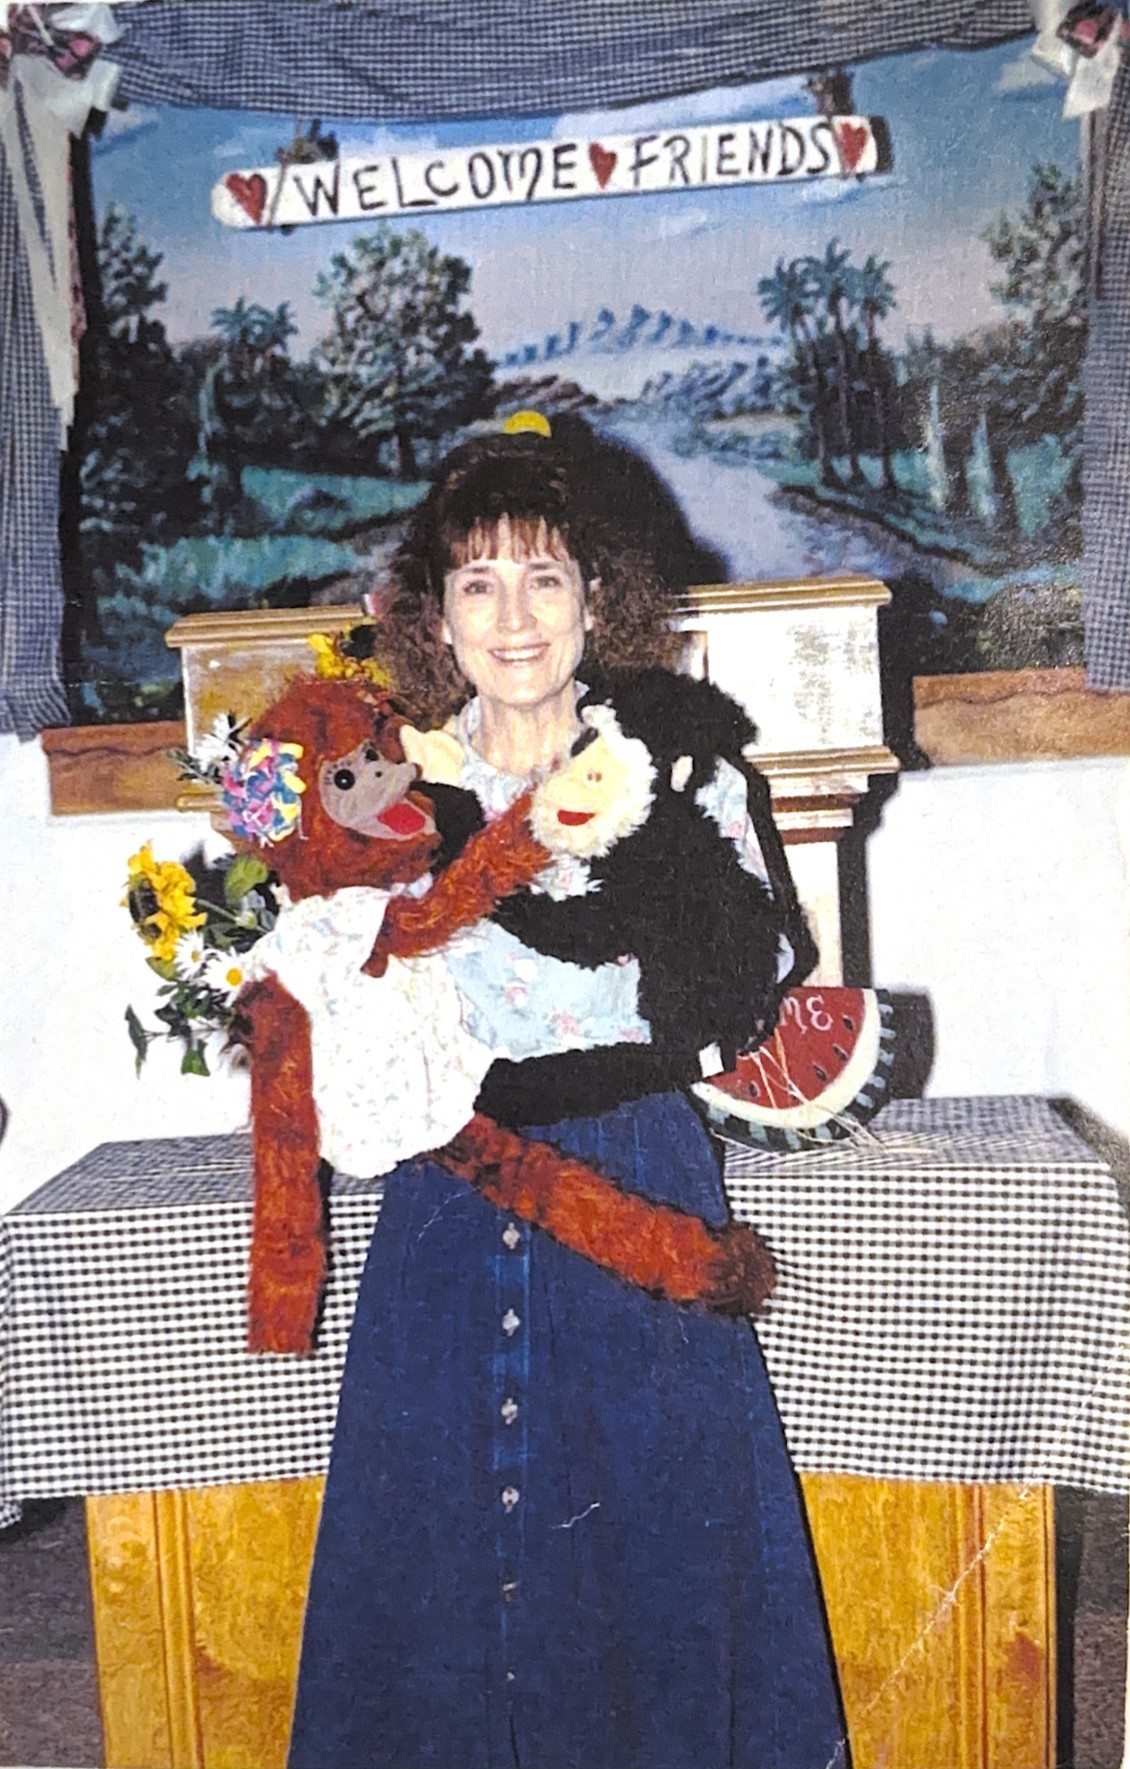 Obituary for Molly Gulledge